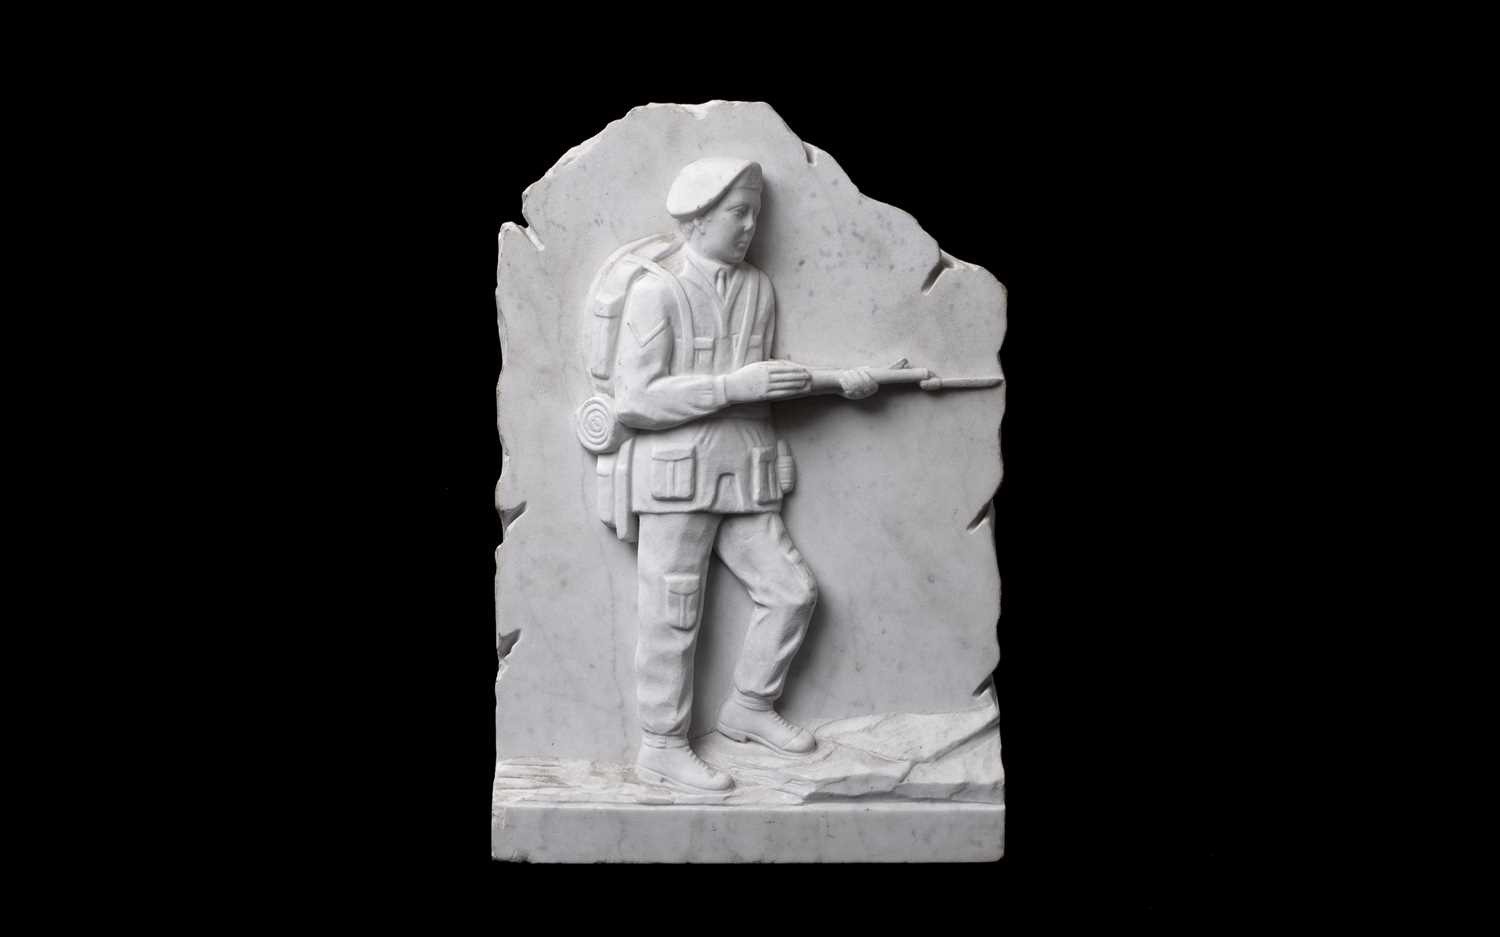 AN EARLY 20TH CENTURY MARBLE RELIEF OF A WW1 SOLDIER - Image 2 of 2